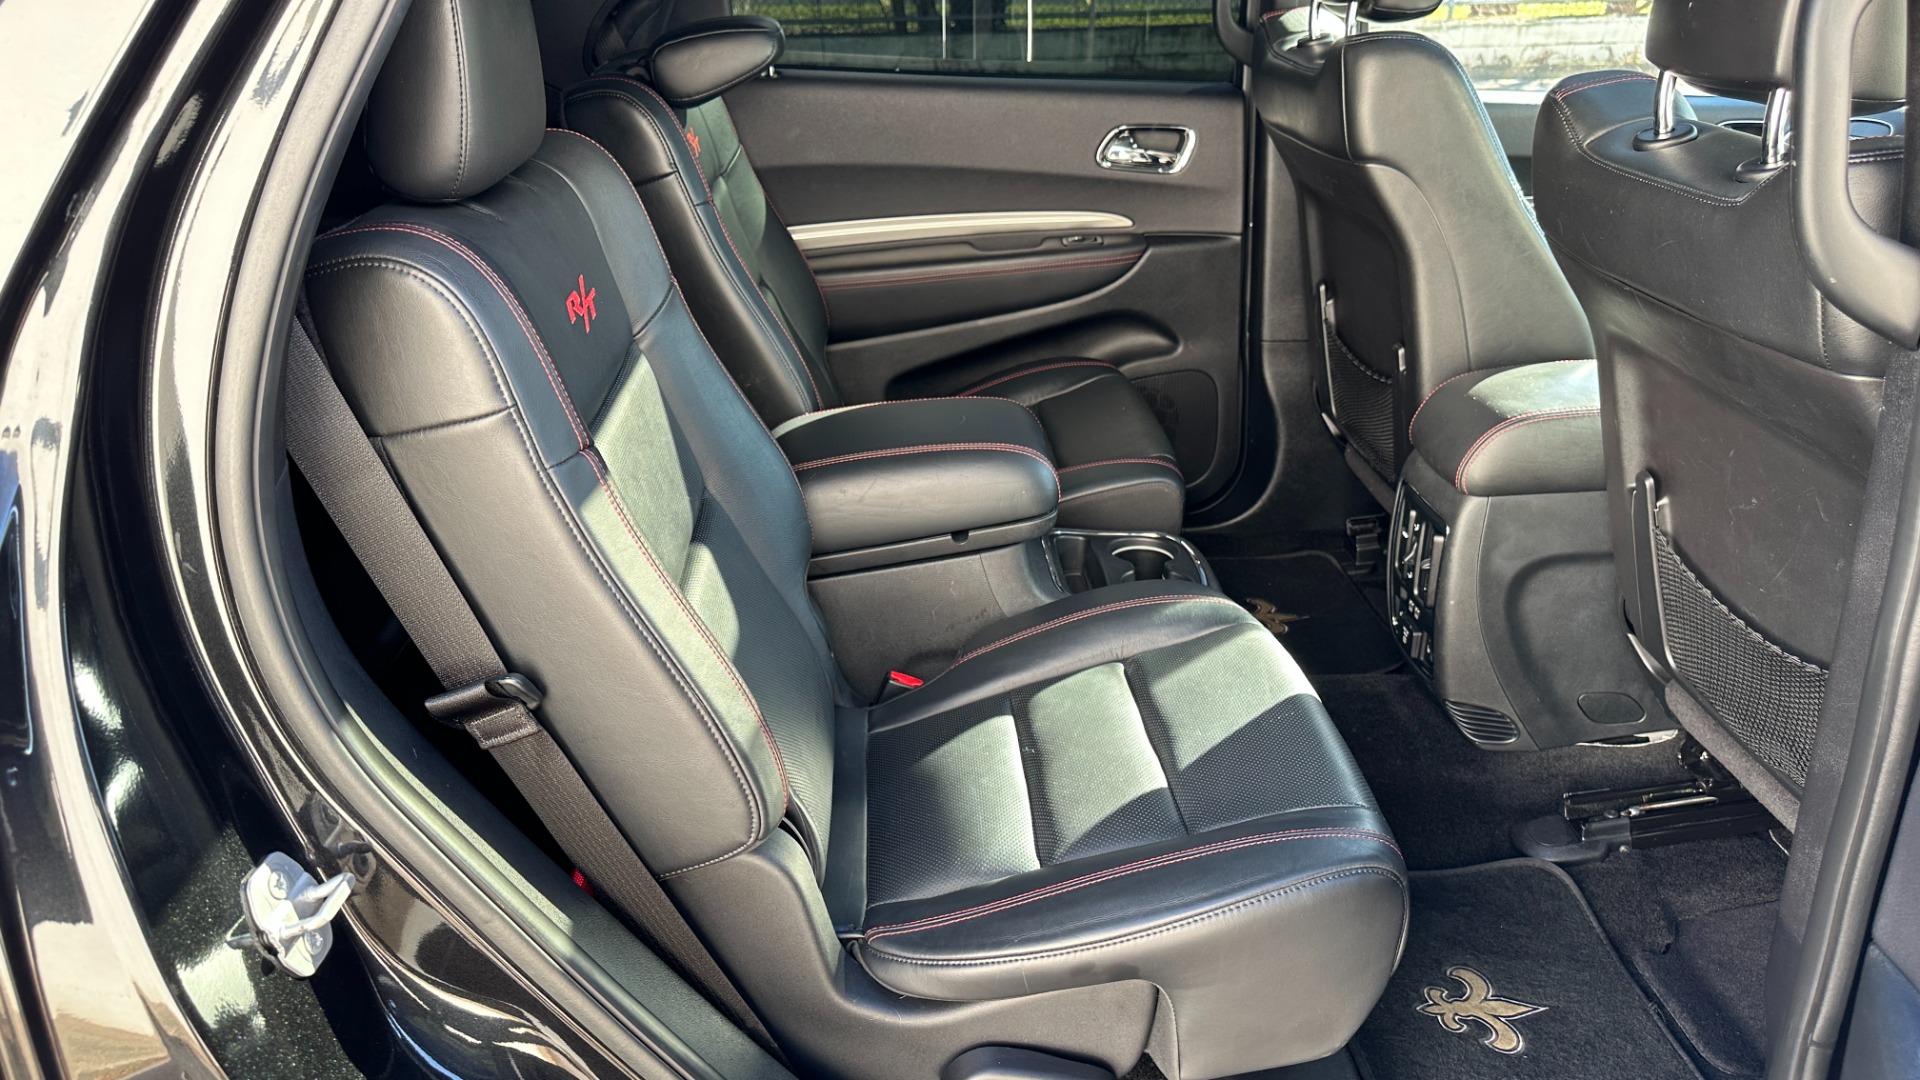 Used 2015 Dodge Durango R/T / HEMI V8 / CAPTAINS CHAIRS / 3 ROW SEATING / TECH PKG / NAPPA LEATHER  for sale Sold at Formula Imports in Charlotte NC 28227 34